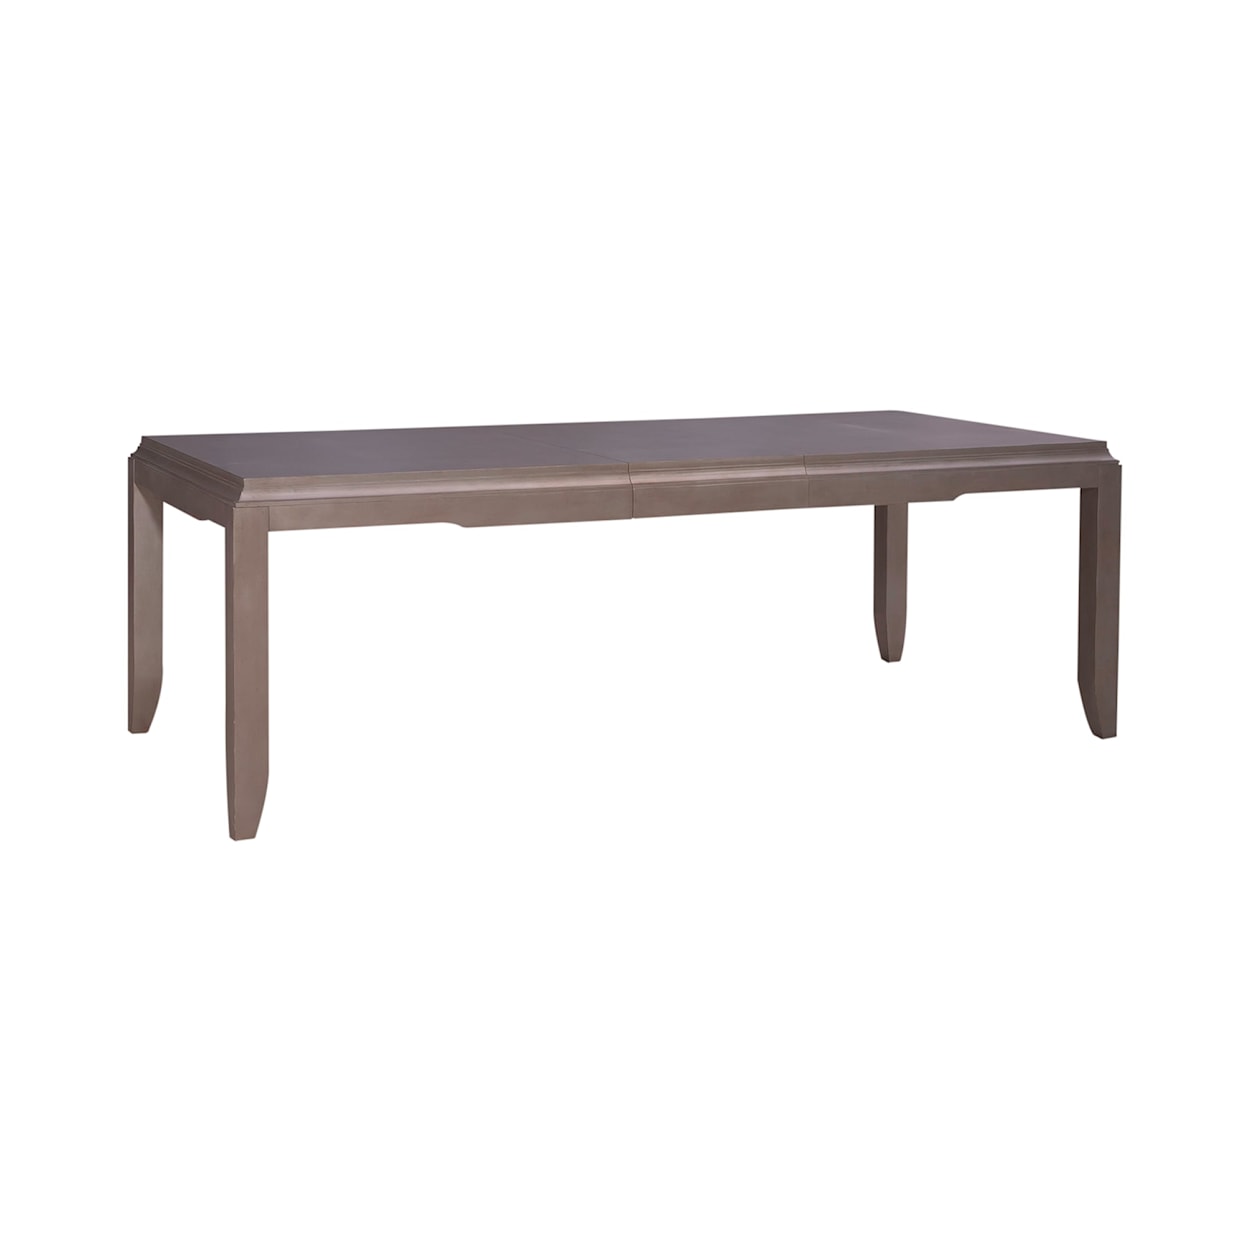 Liberty Furniture Montage Dining Table